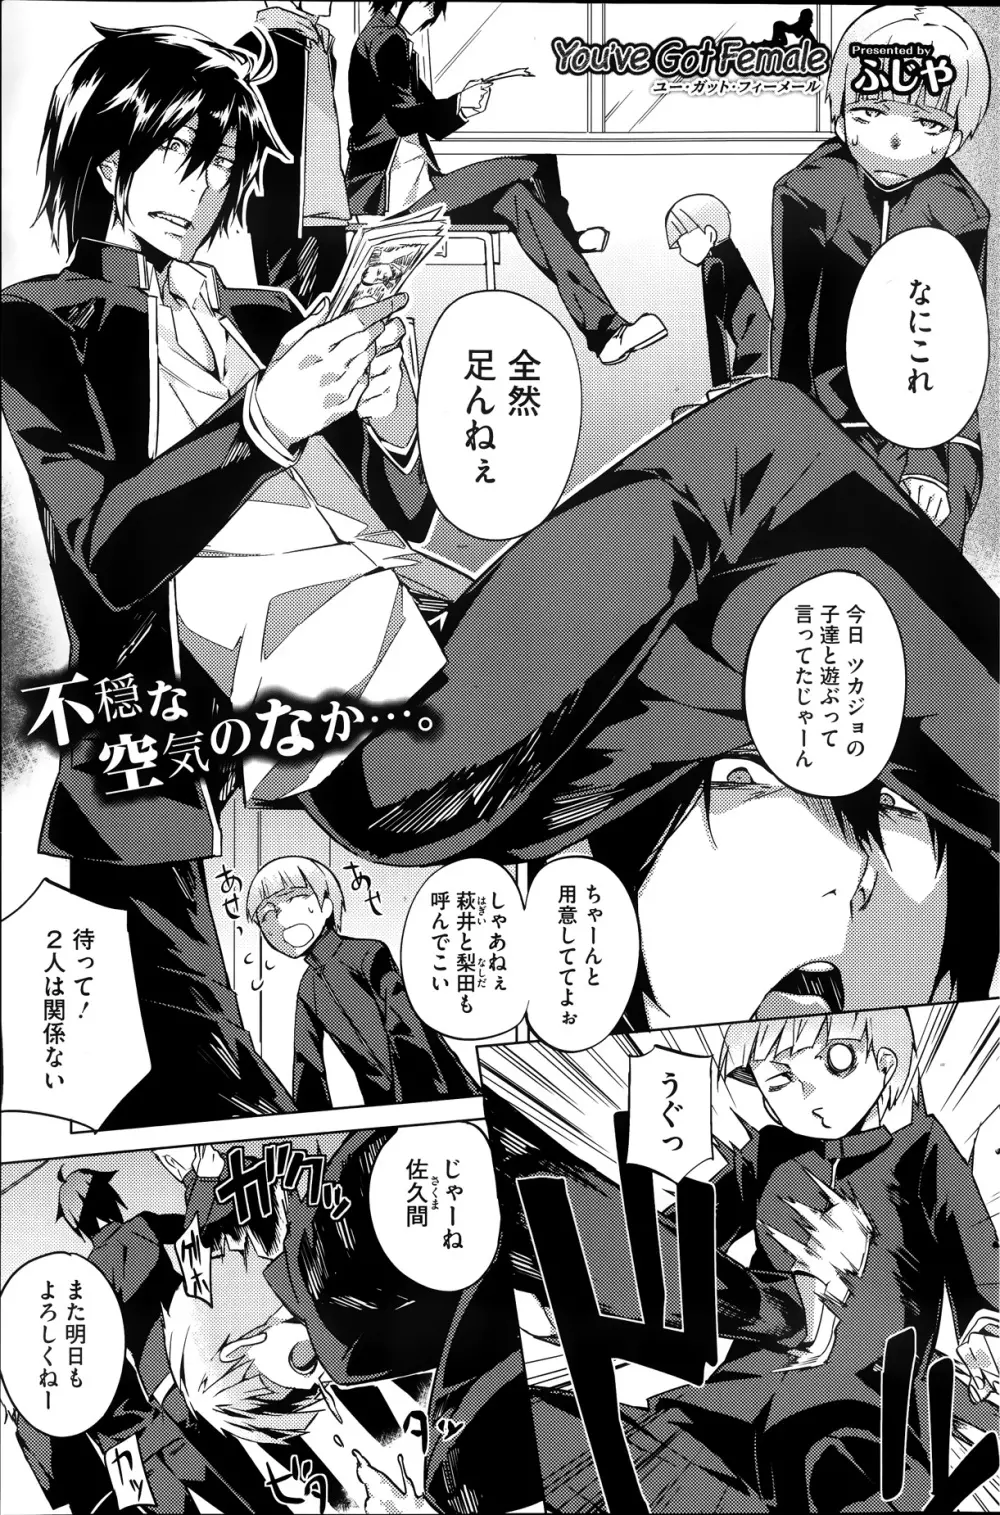 You've Got Female 第01-03話 Page.1